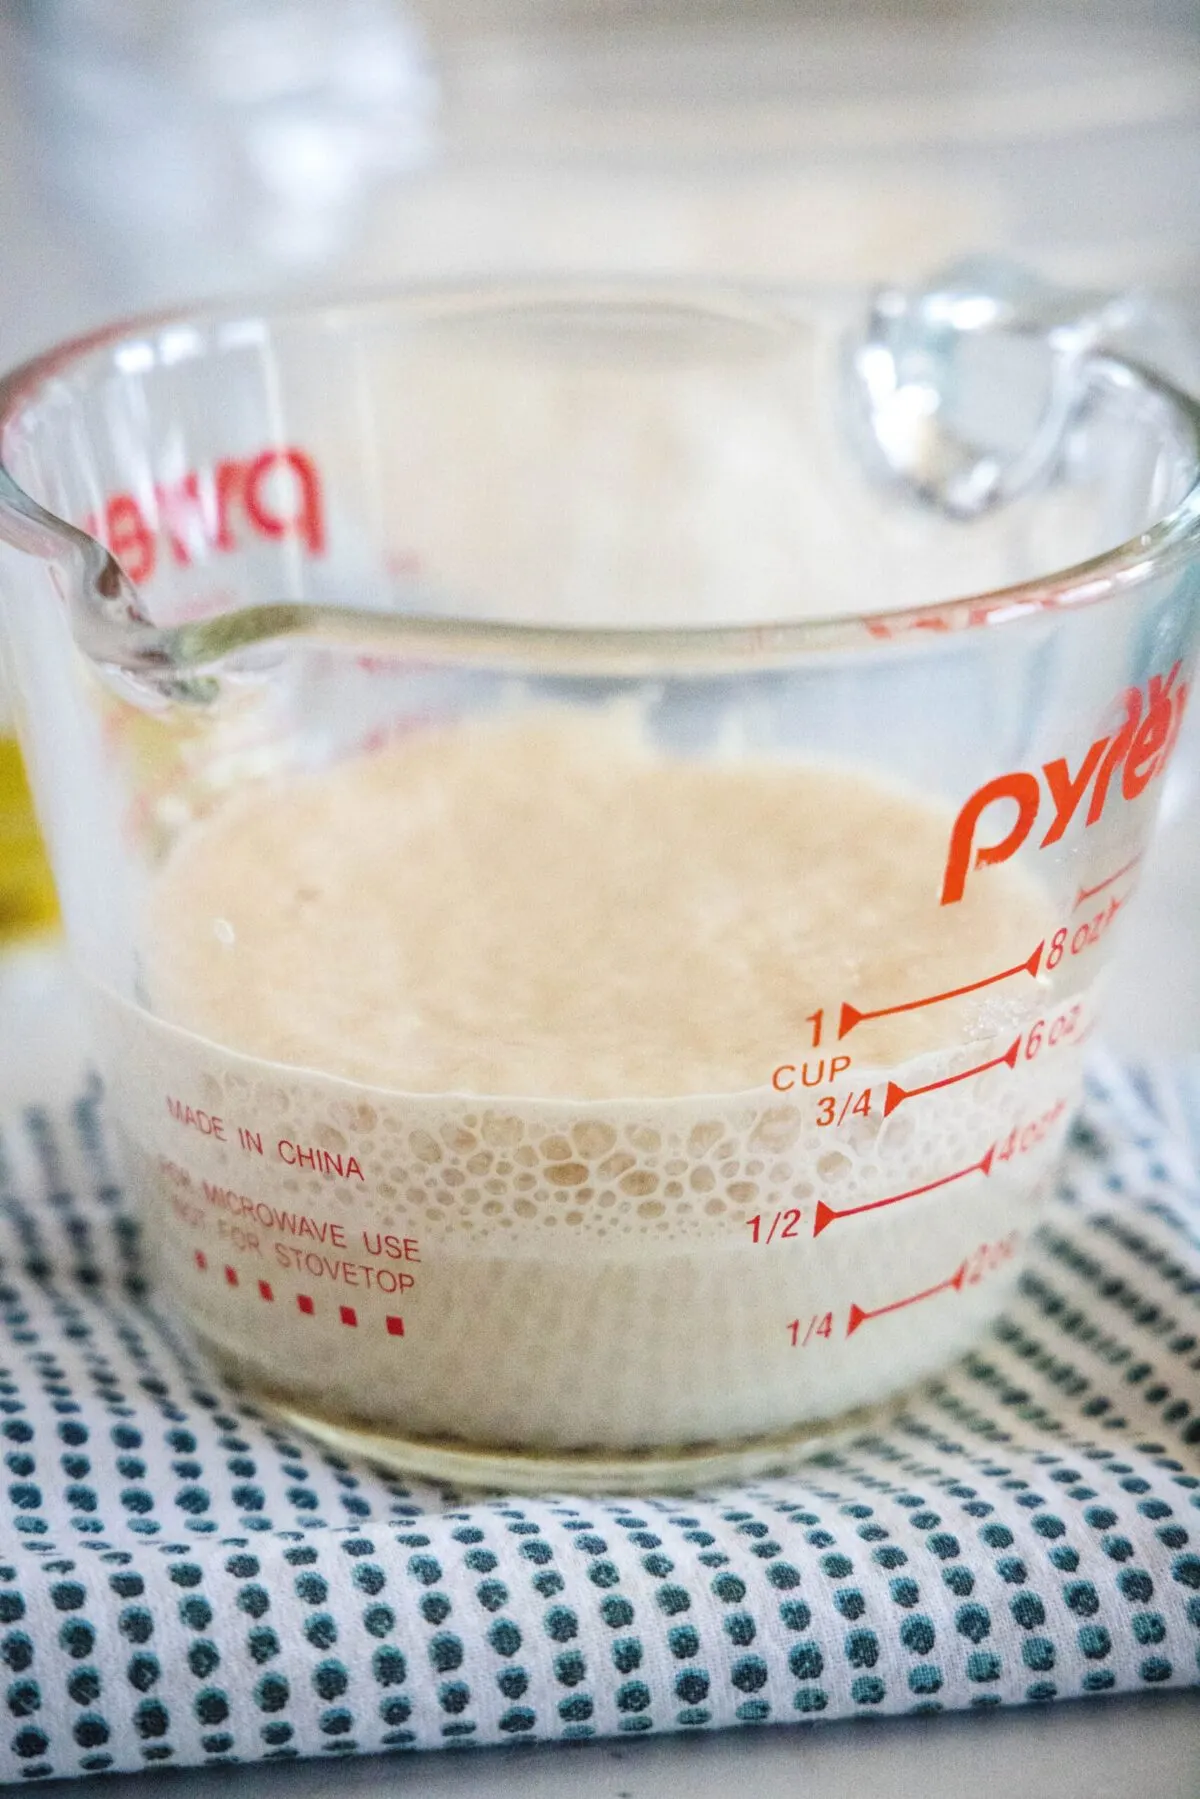 A pyrex container with yeast and water foaming in it